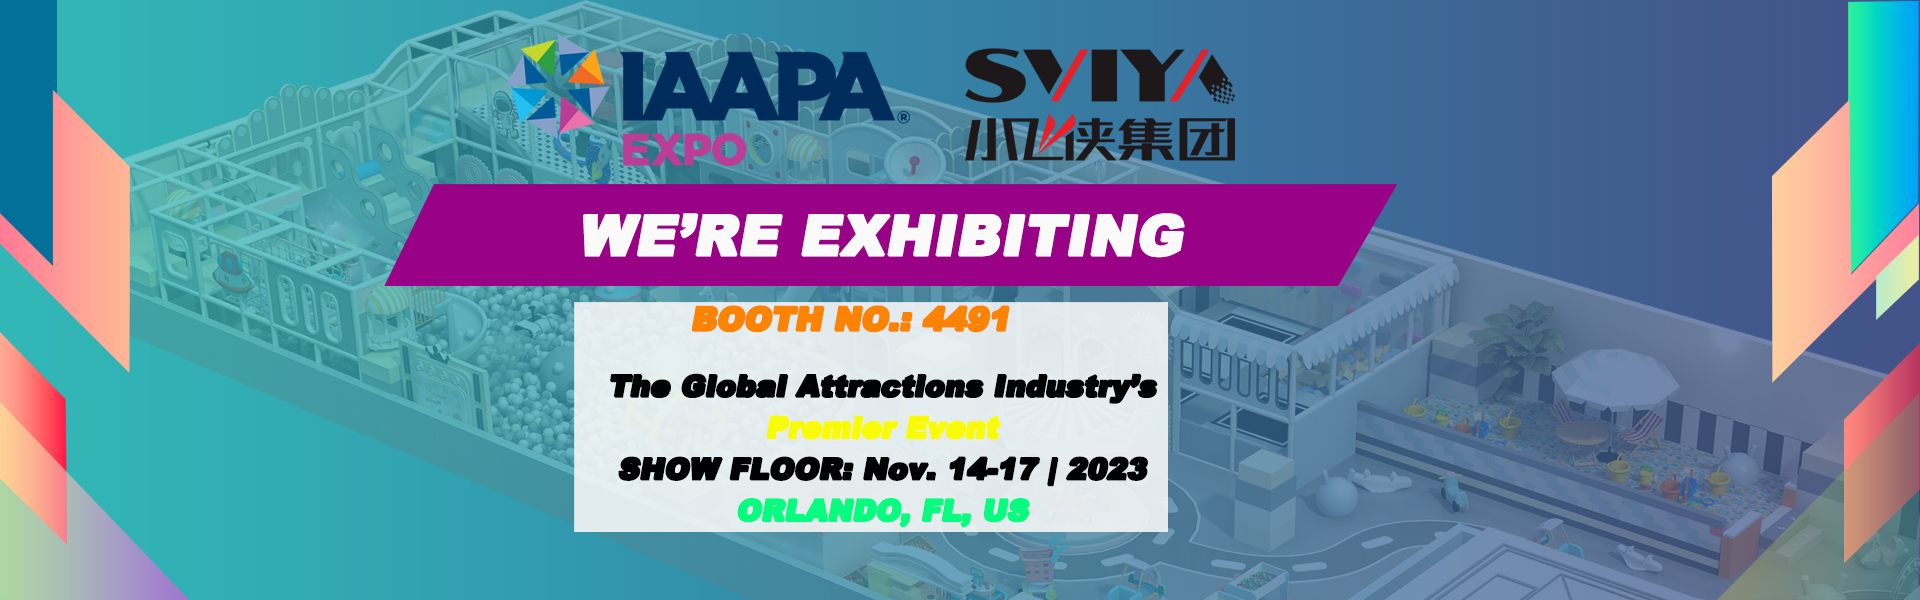 Looking forward to meeting you at IAAPA EXPO 2023 in Orlando